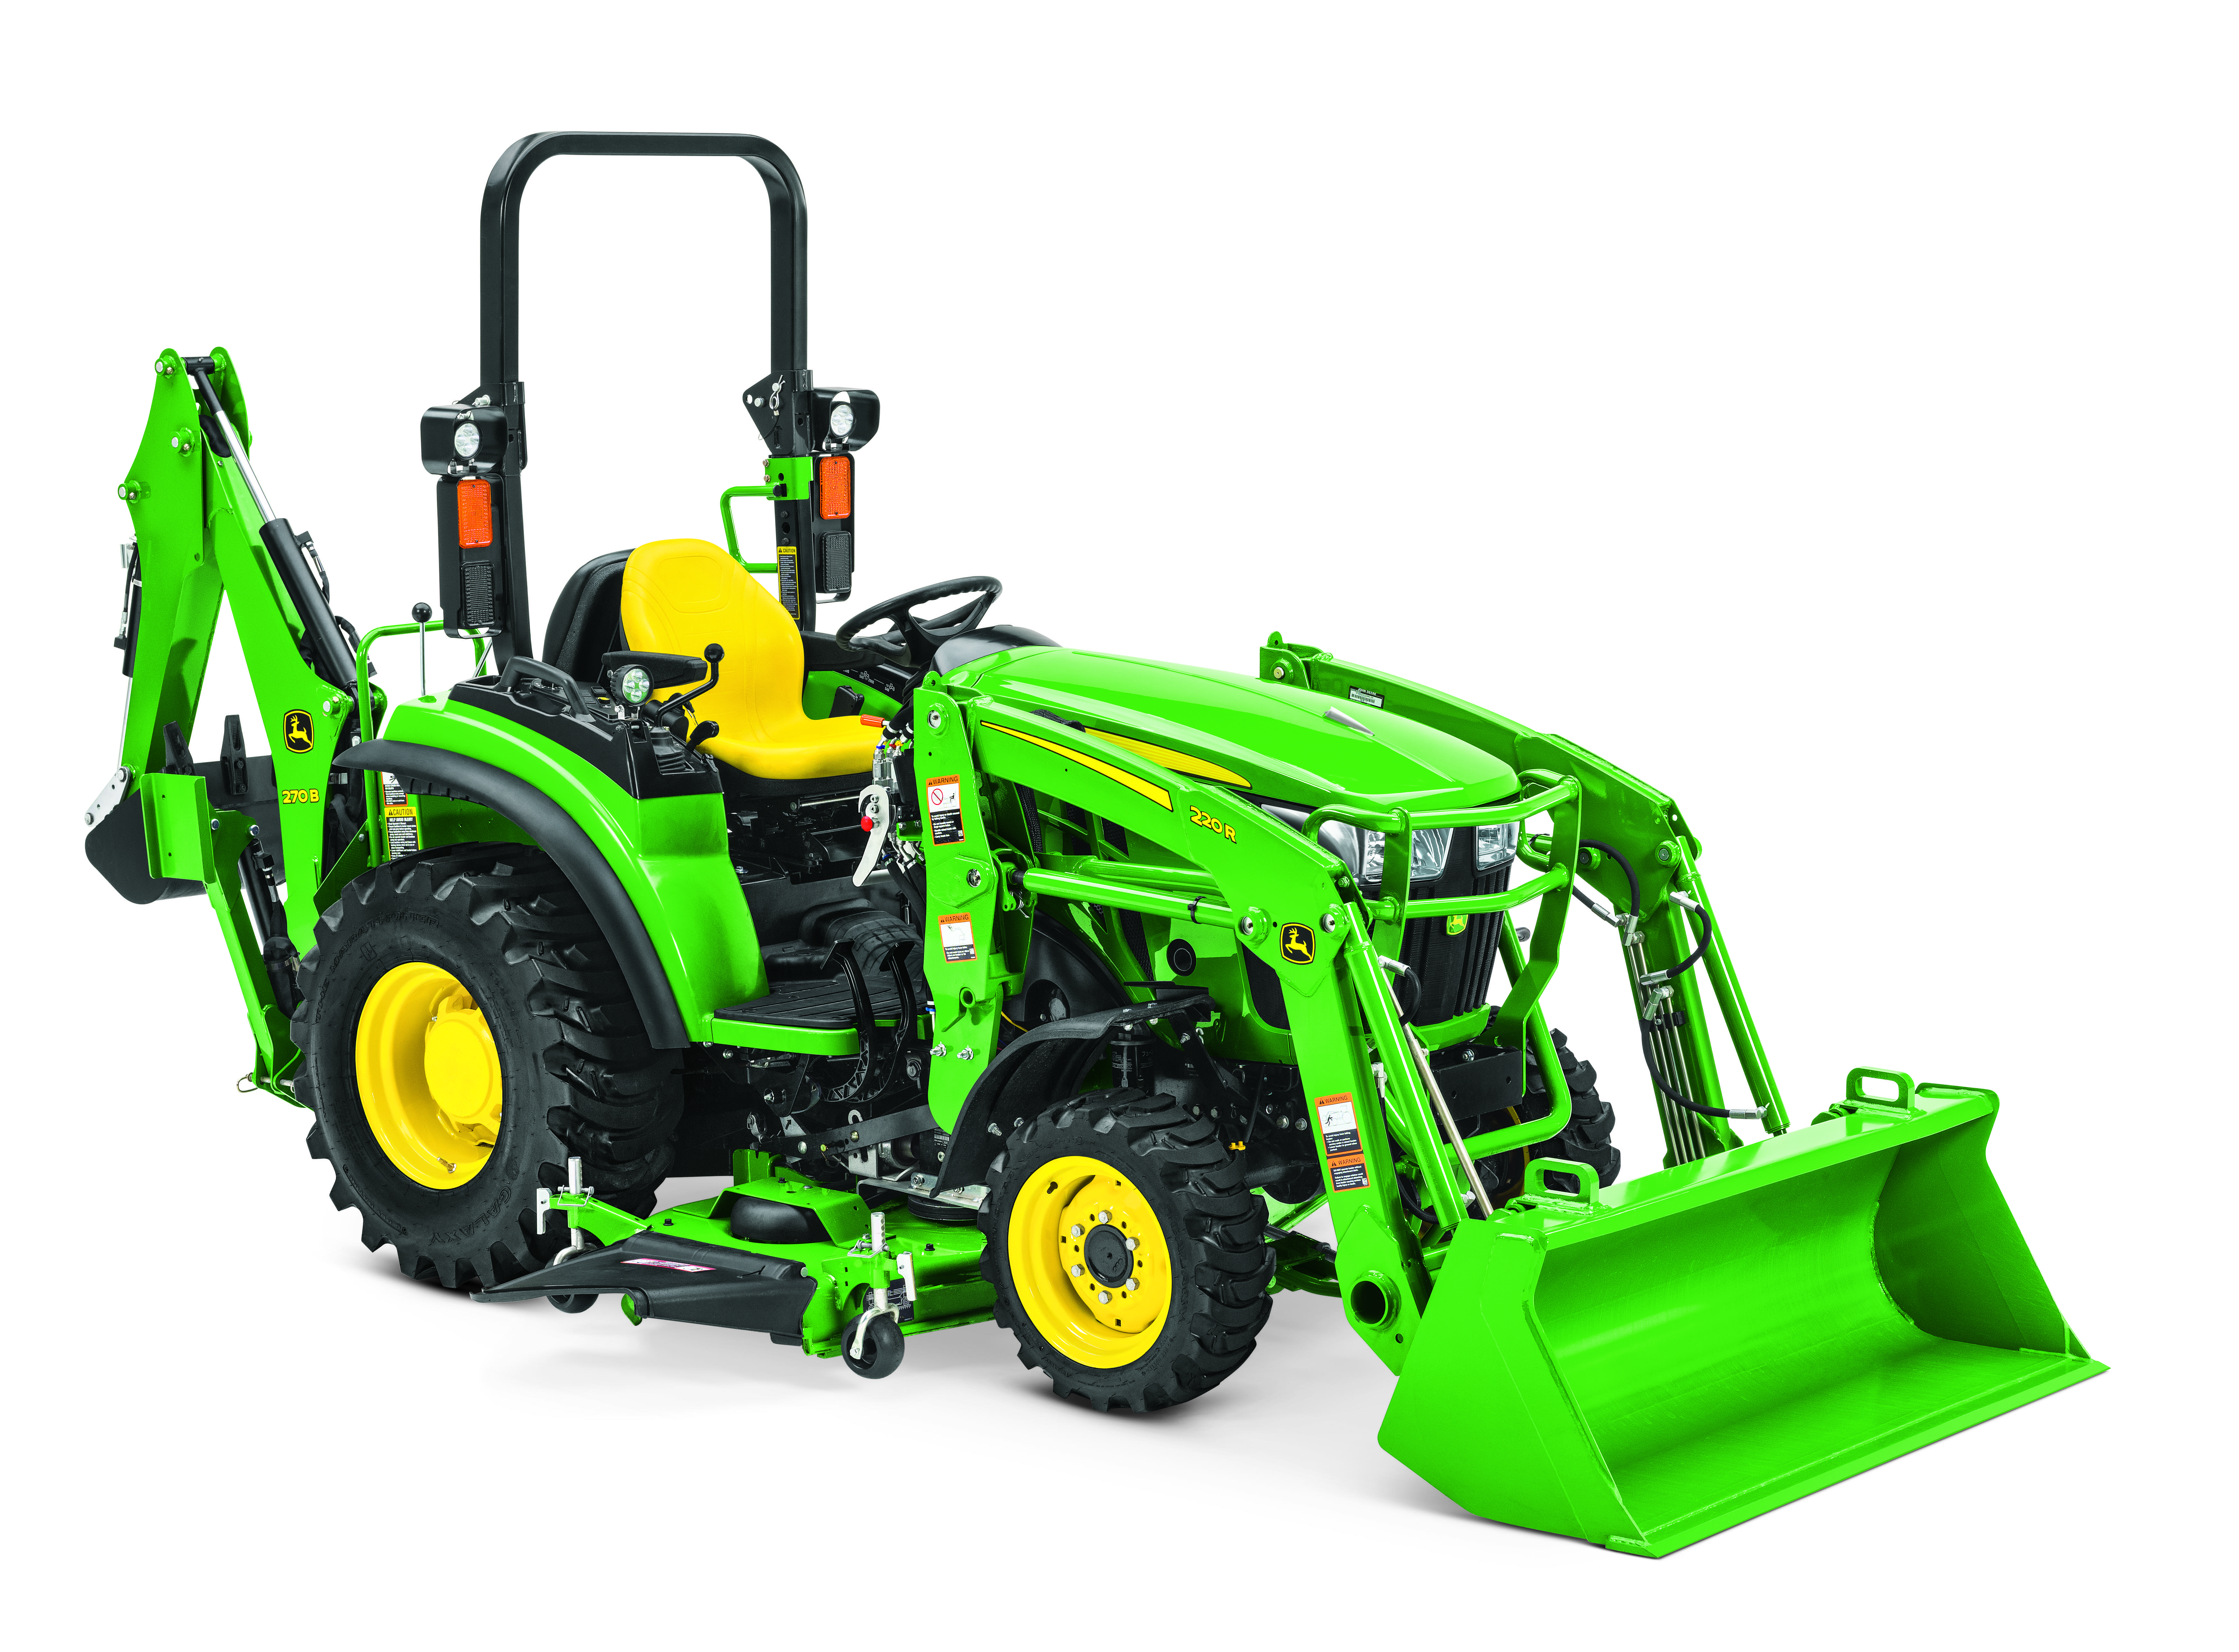 John Deere expands two compact utility tractor series